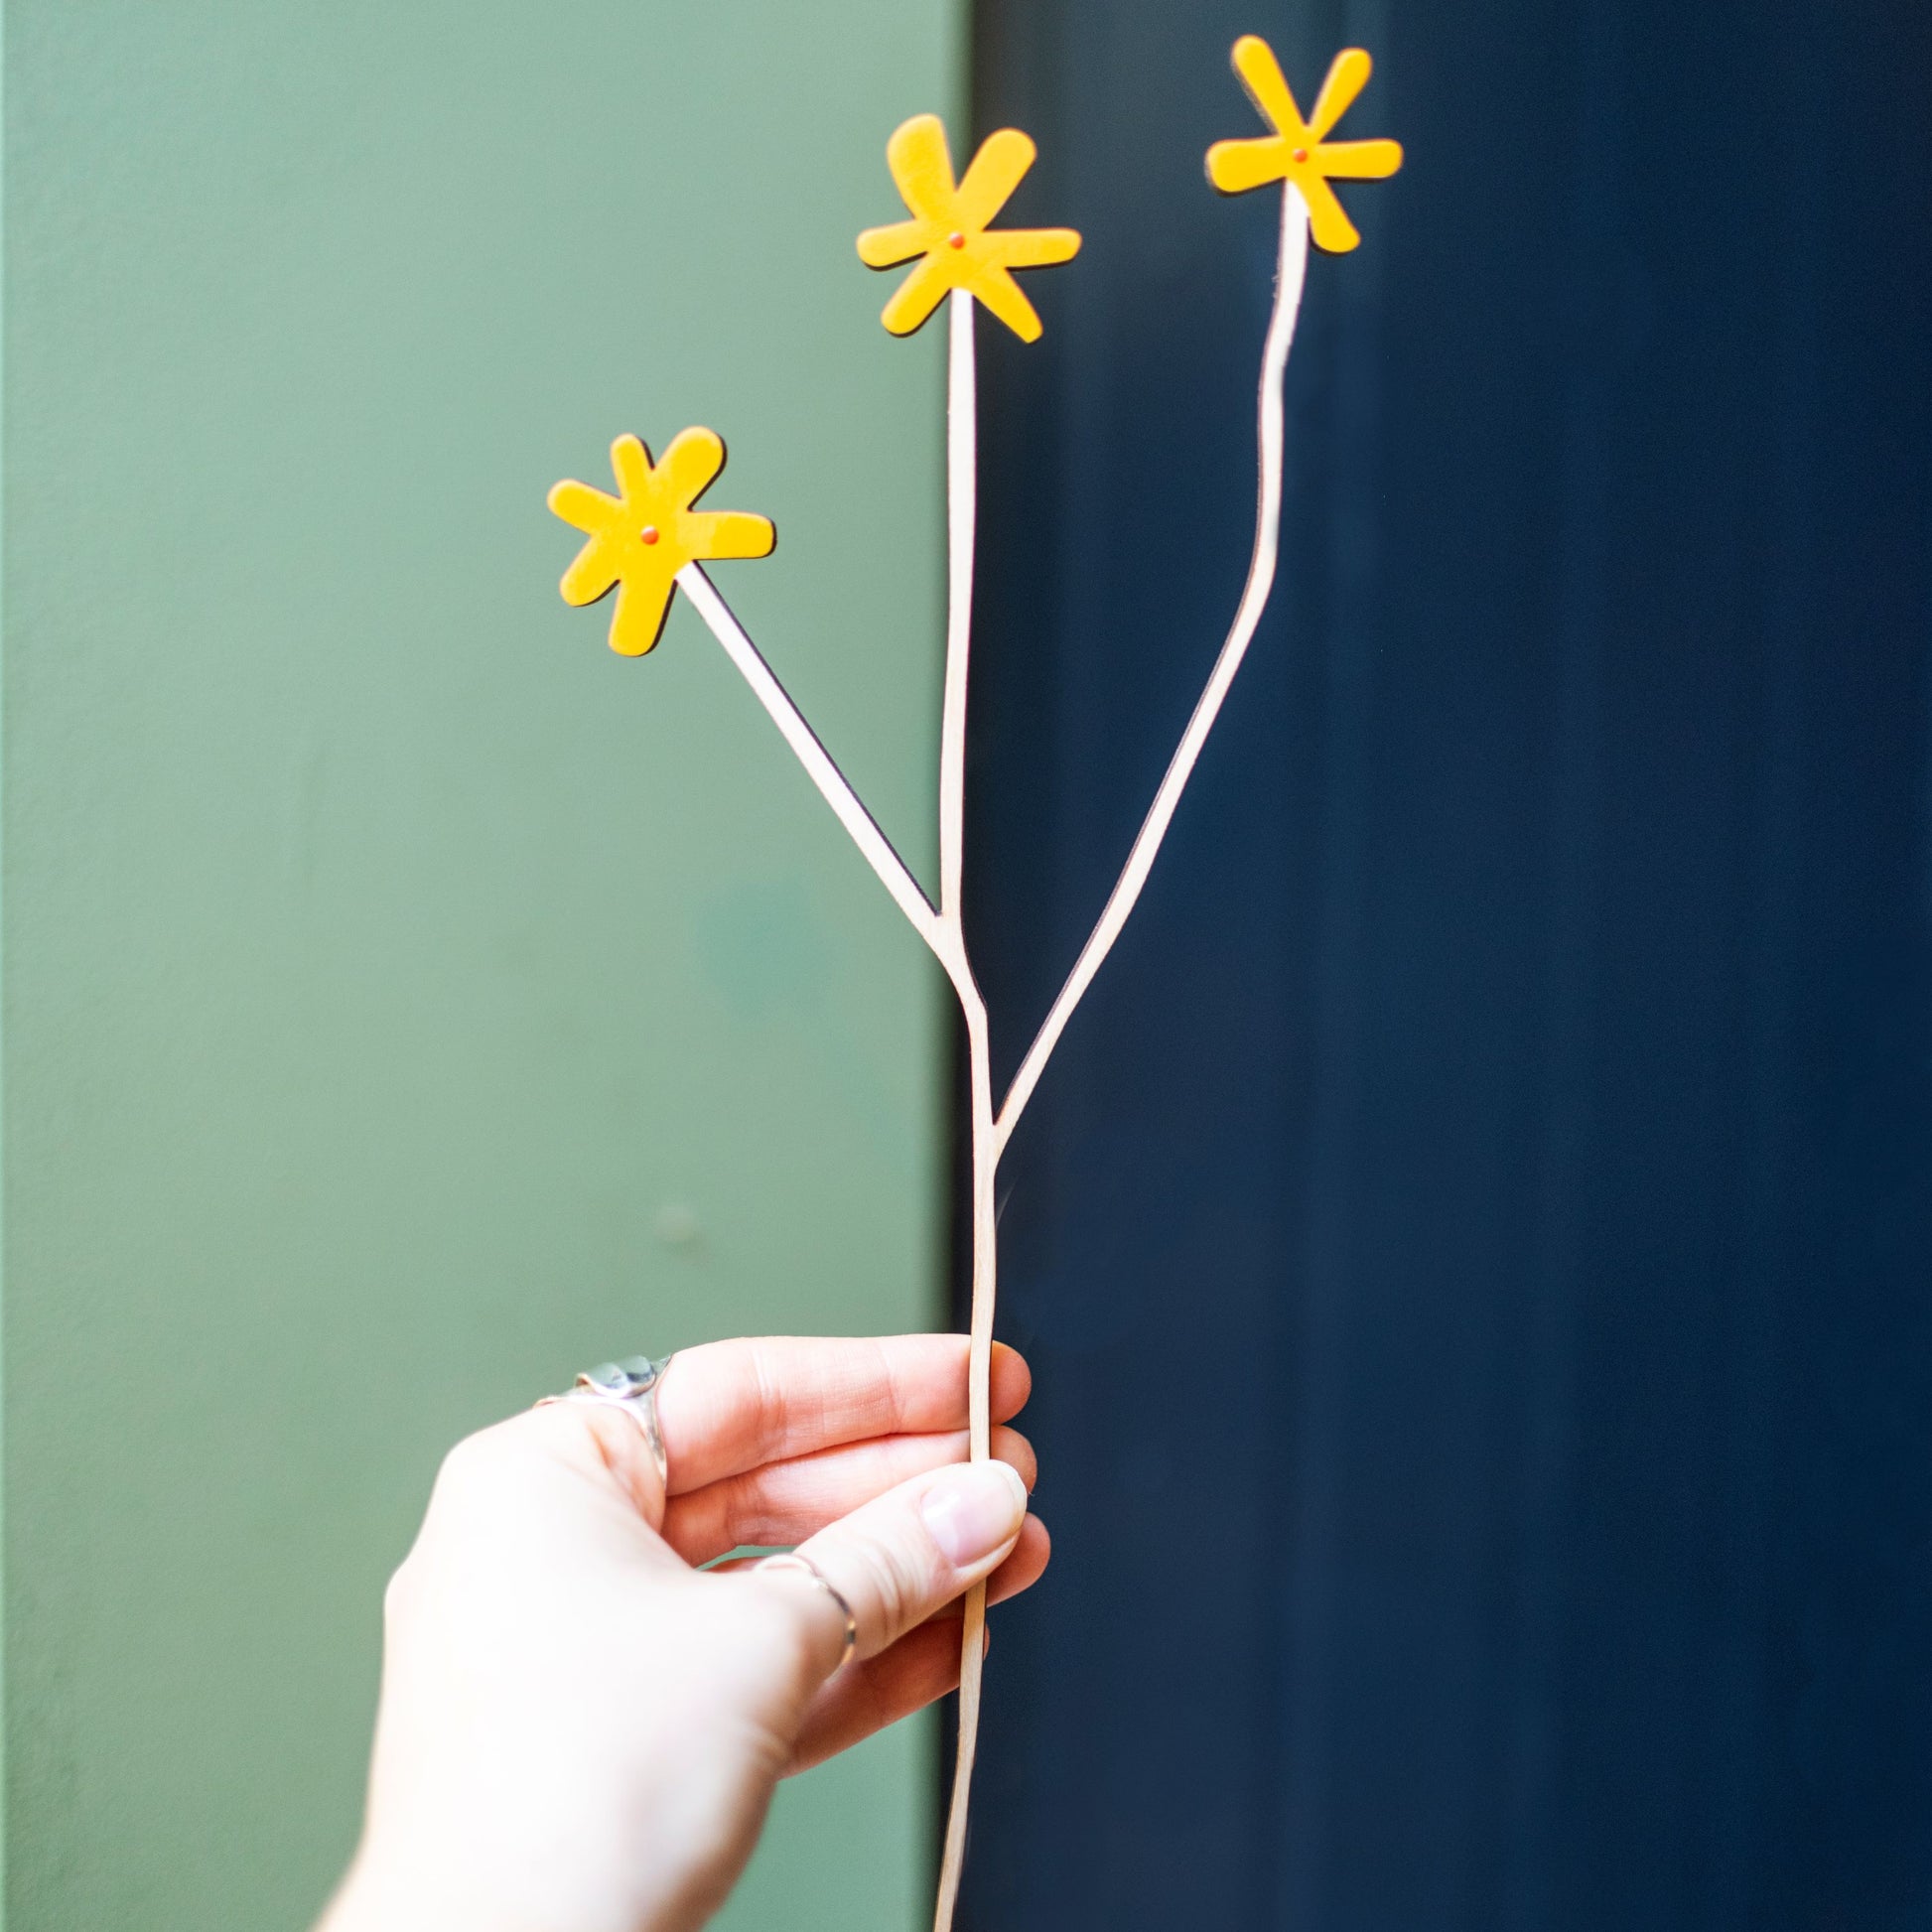 Hand painted wooden Daisy - The Bristol Artisan Handmade Sustainable Gifts and Homewares.